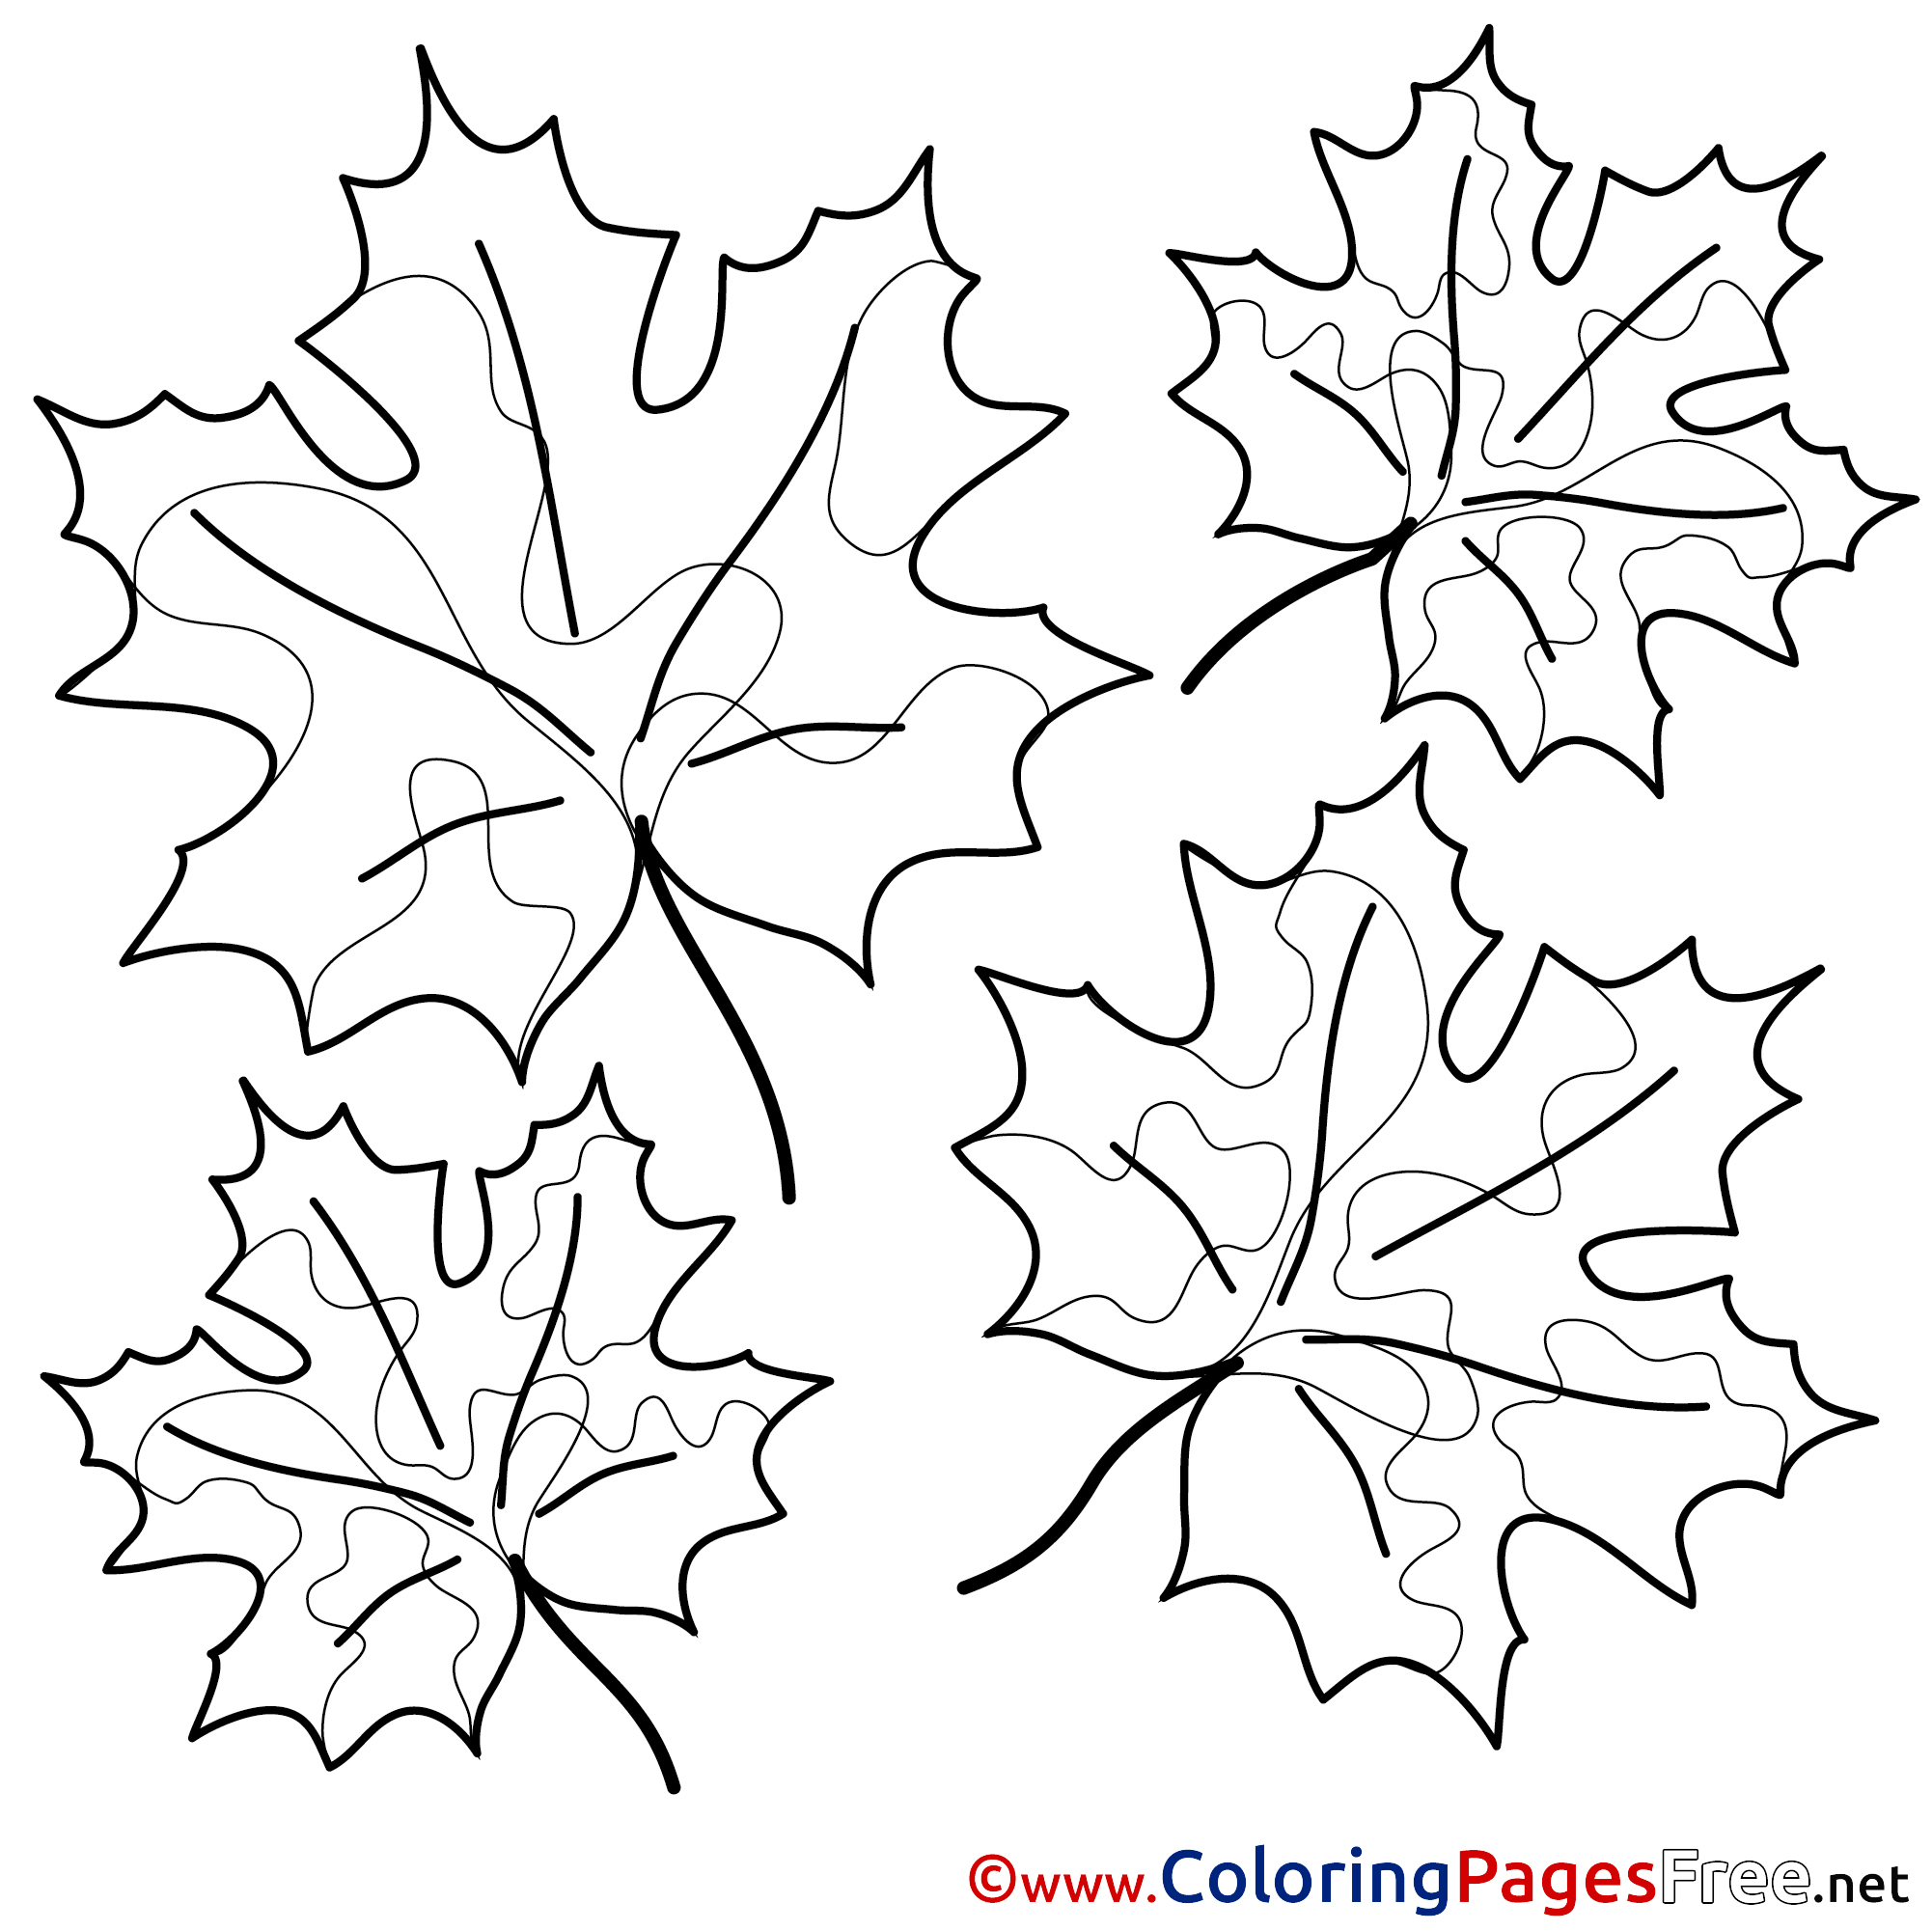 printable-maple-leaf-cut-out-template-of-canada-day-coloring-sketch